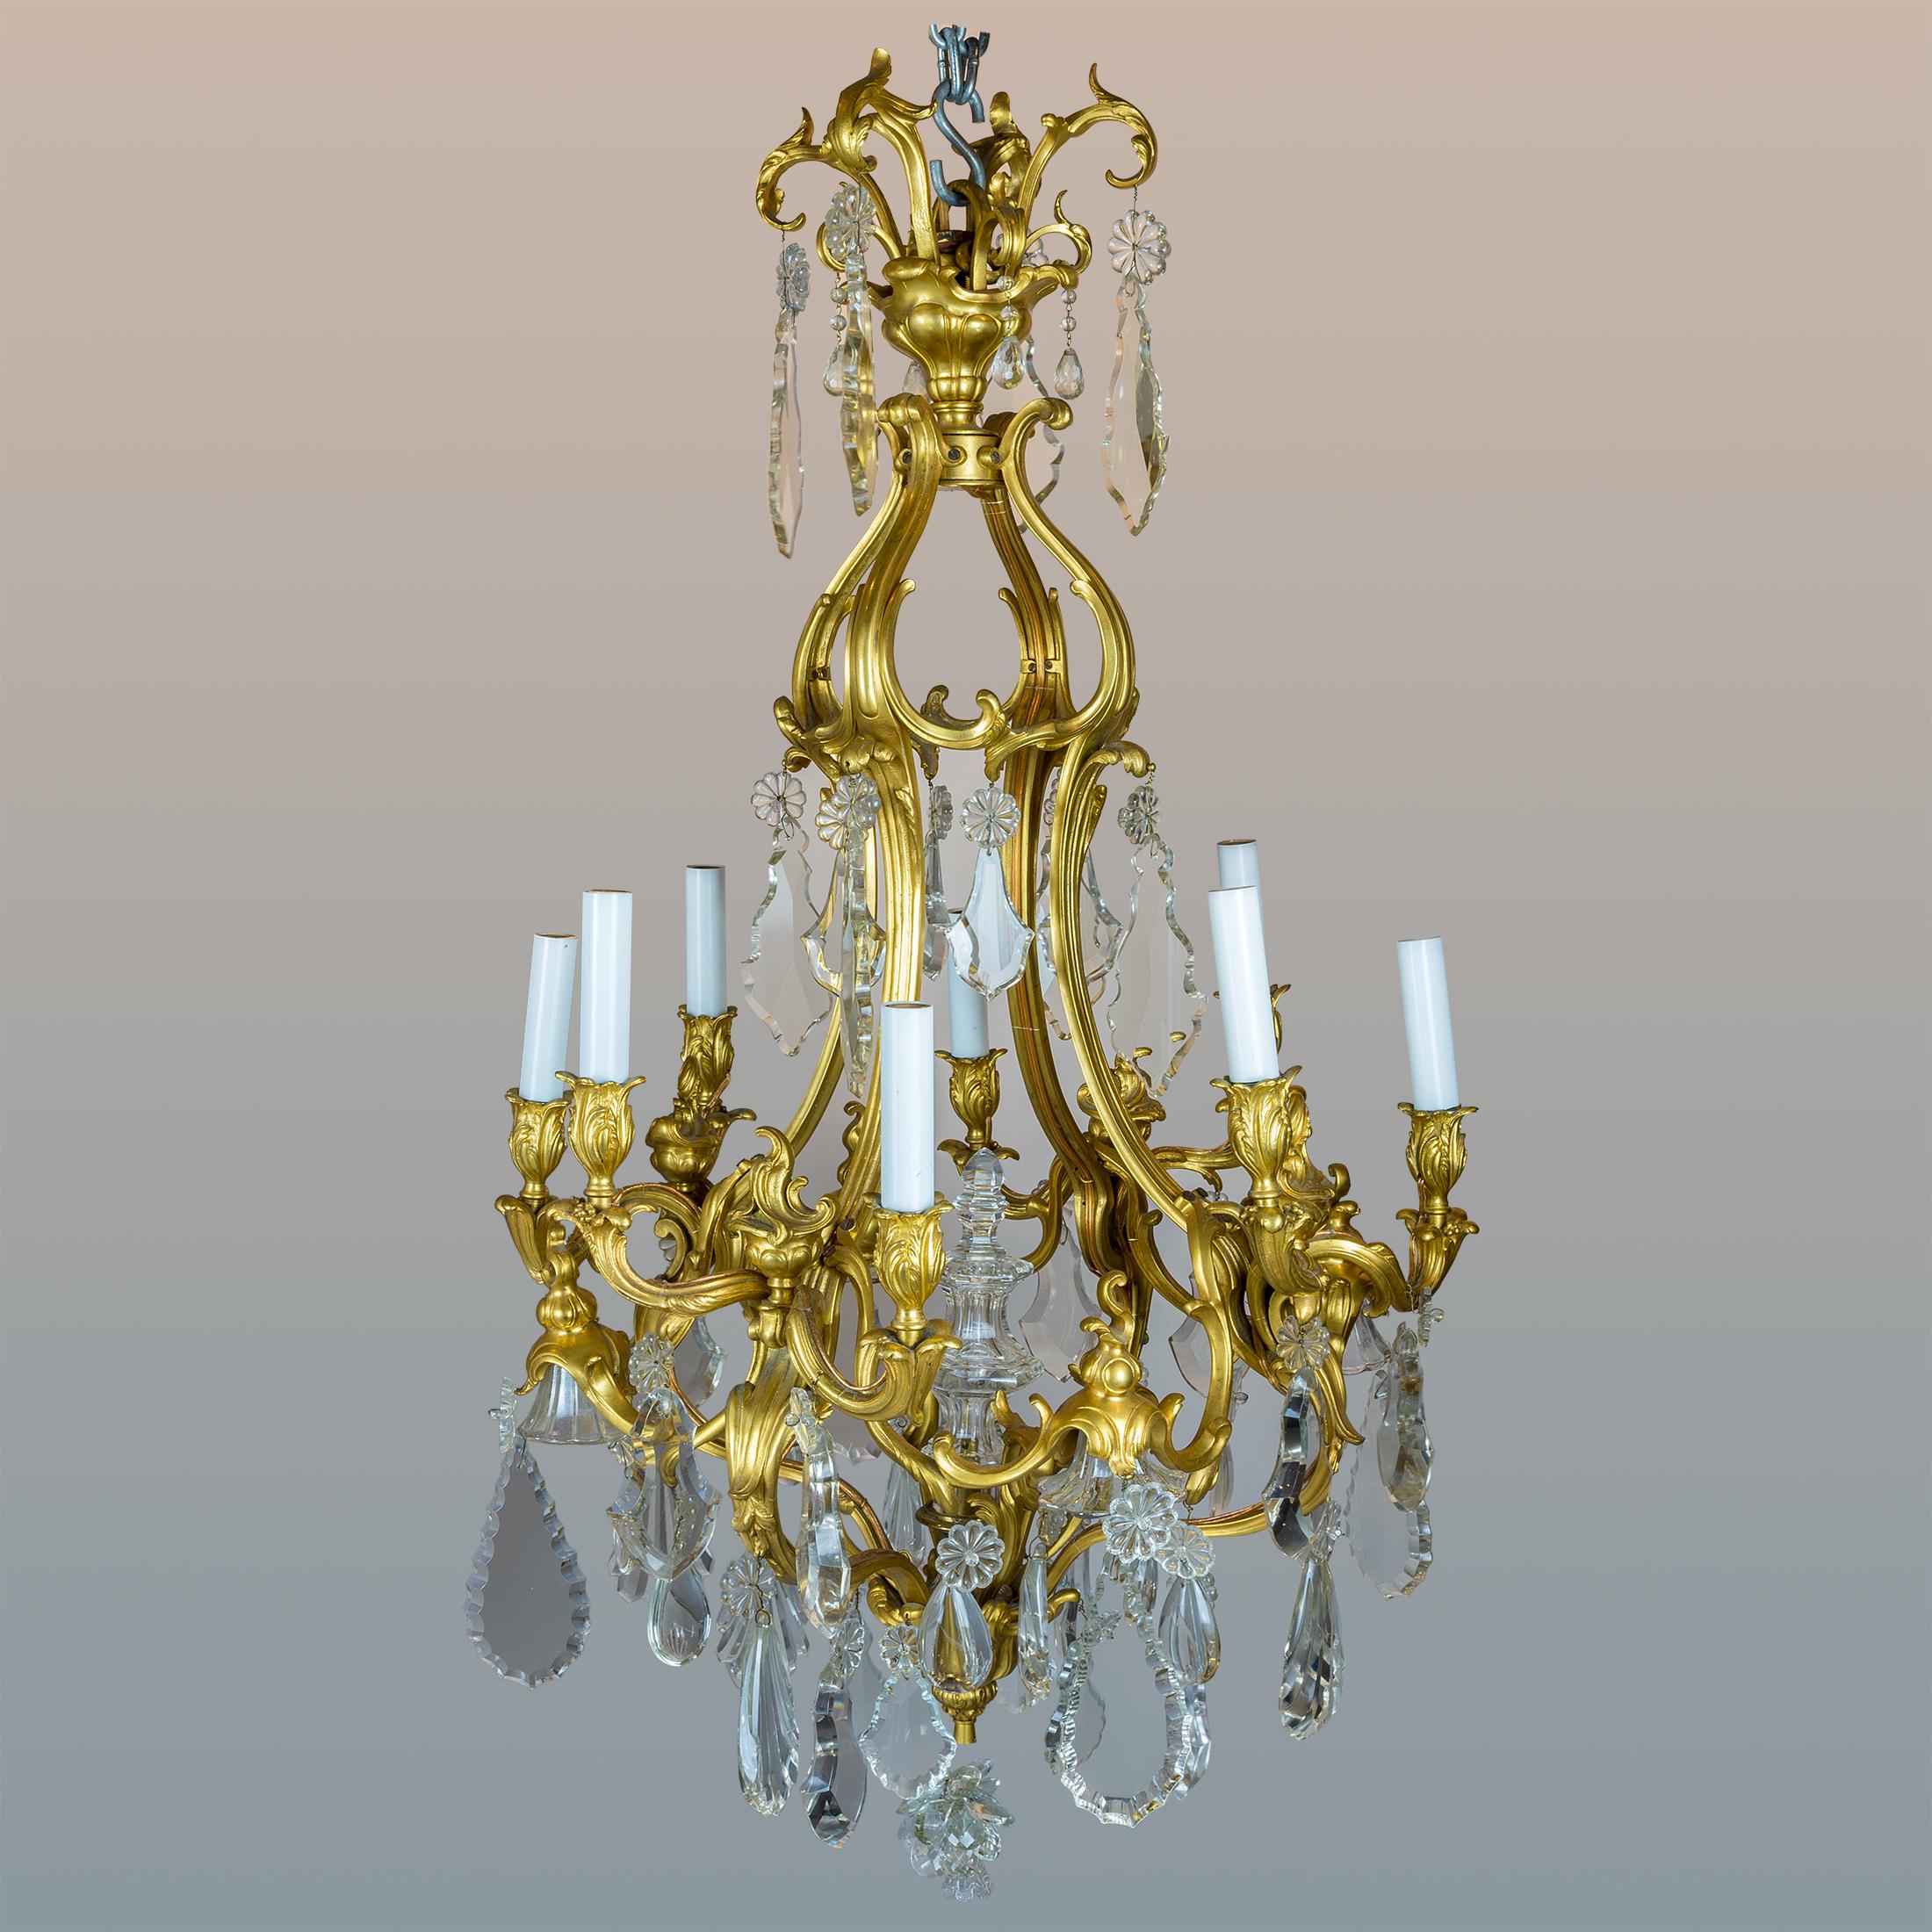 An exquisite Louis XV style gilt-bronze and cut-crystal eight-light chandelier

Date: 19th century
Origin: French
Dimension: 45 in x 22 in.